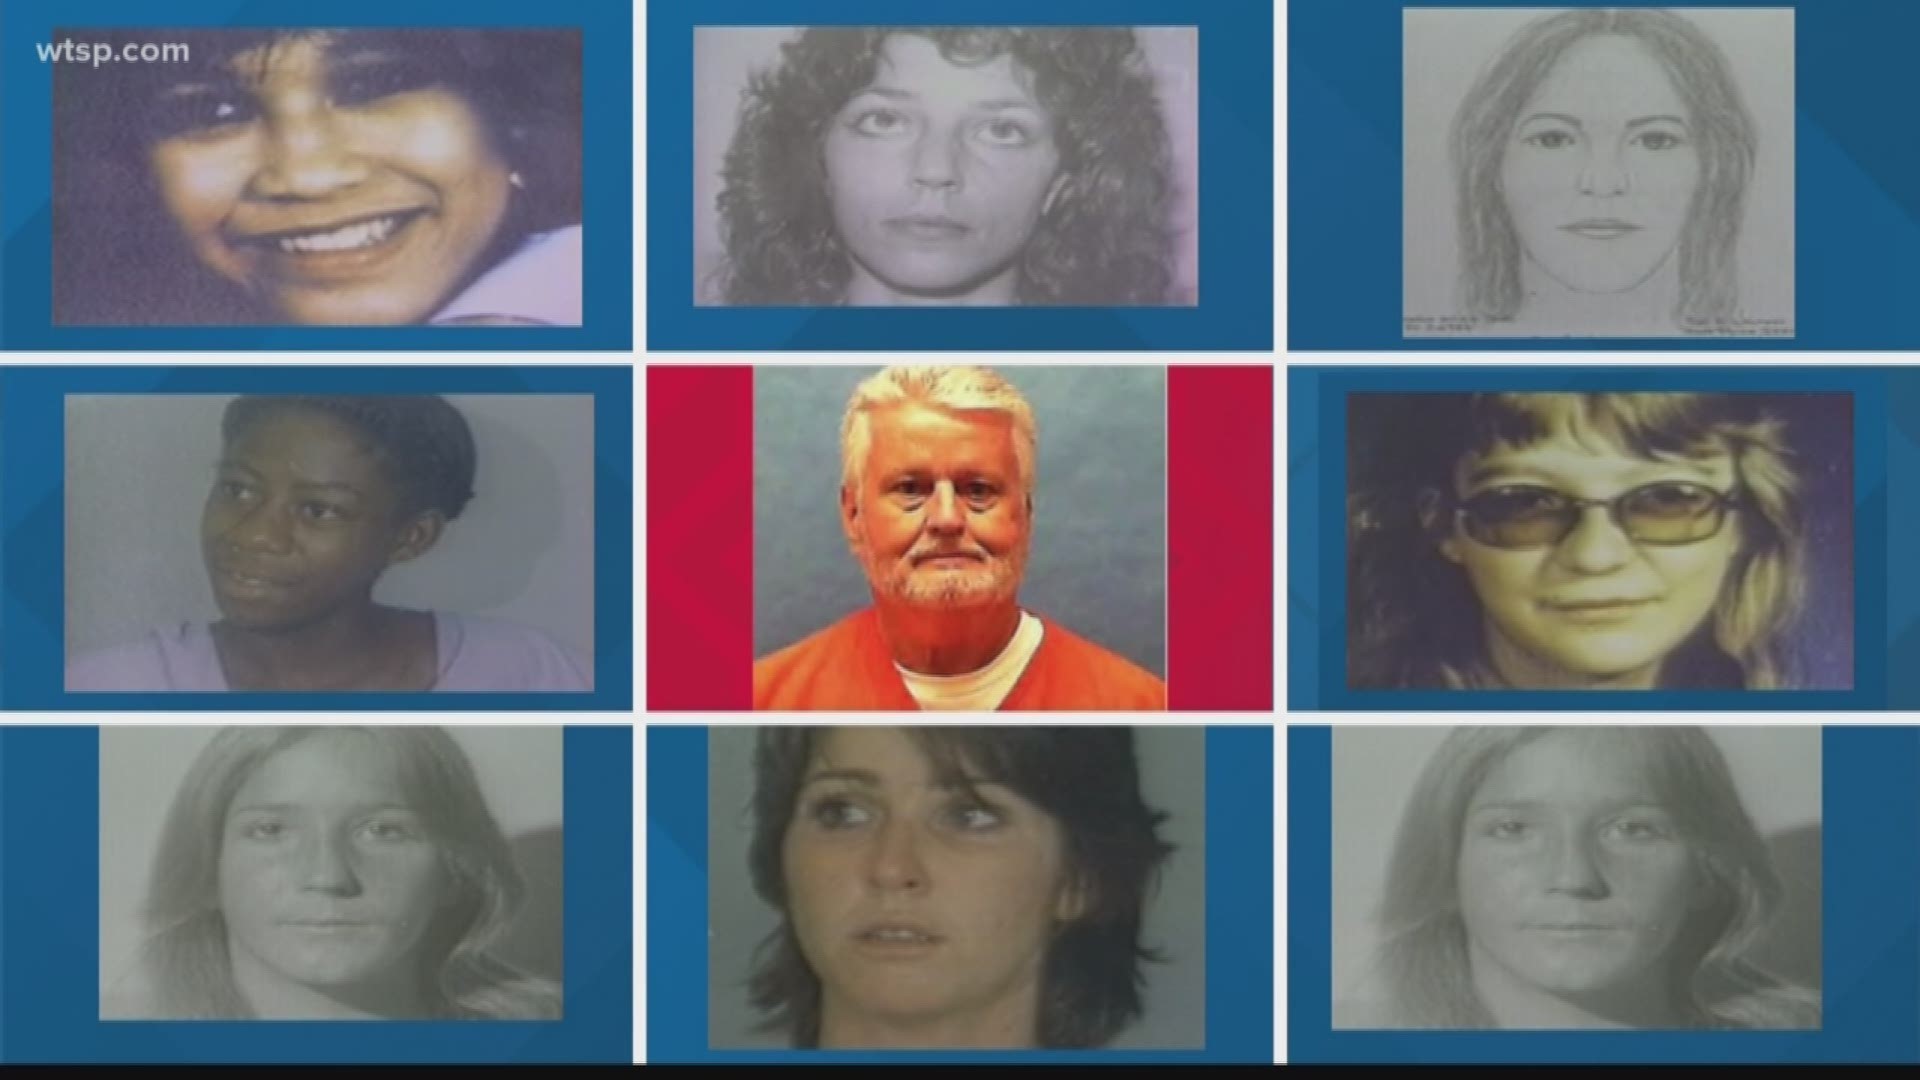 The FBI linked Long to the homicides of 10 women over a period of roughly eight months.